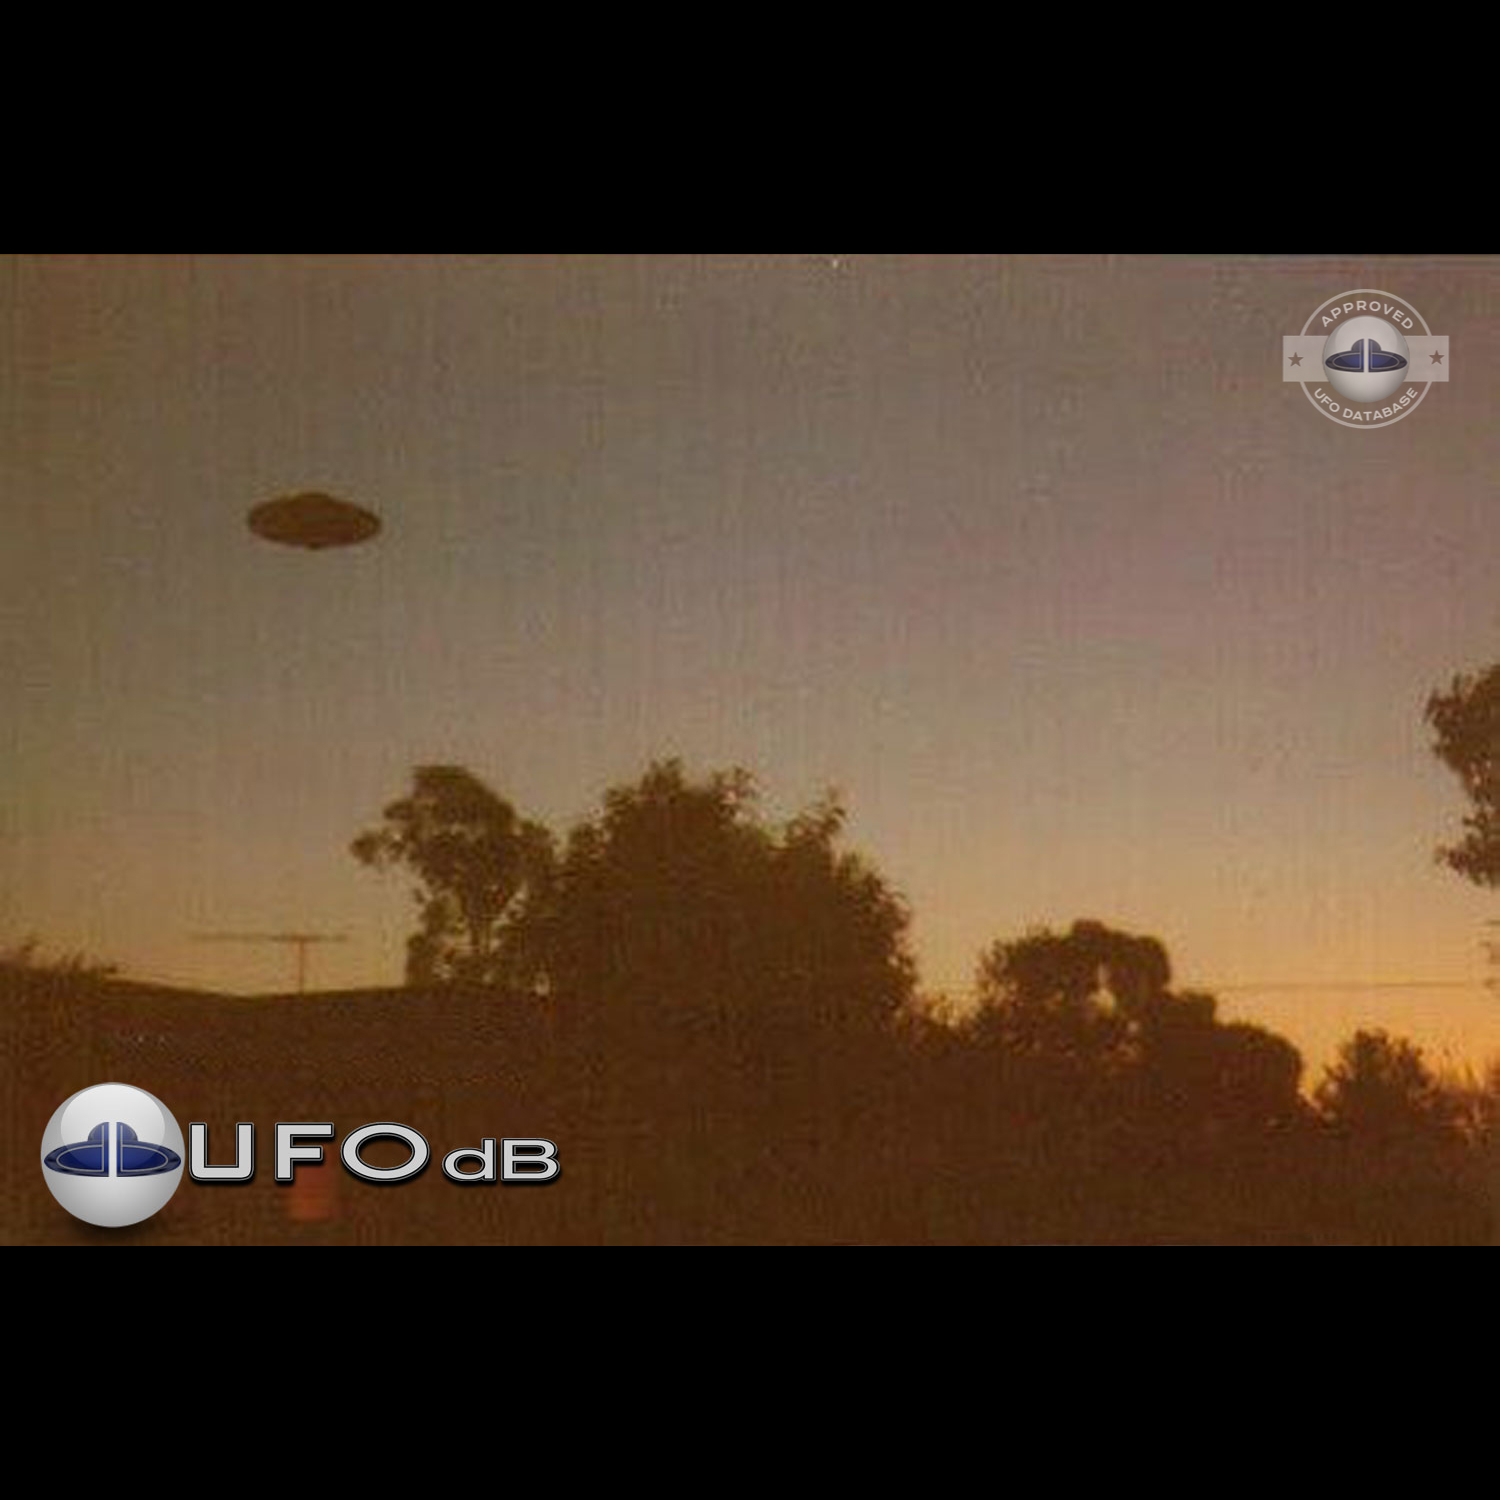 The UFO has a Saturn shape and can be seen at nightfall over a house UFO Picture #65-1